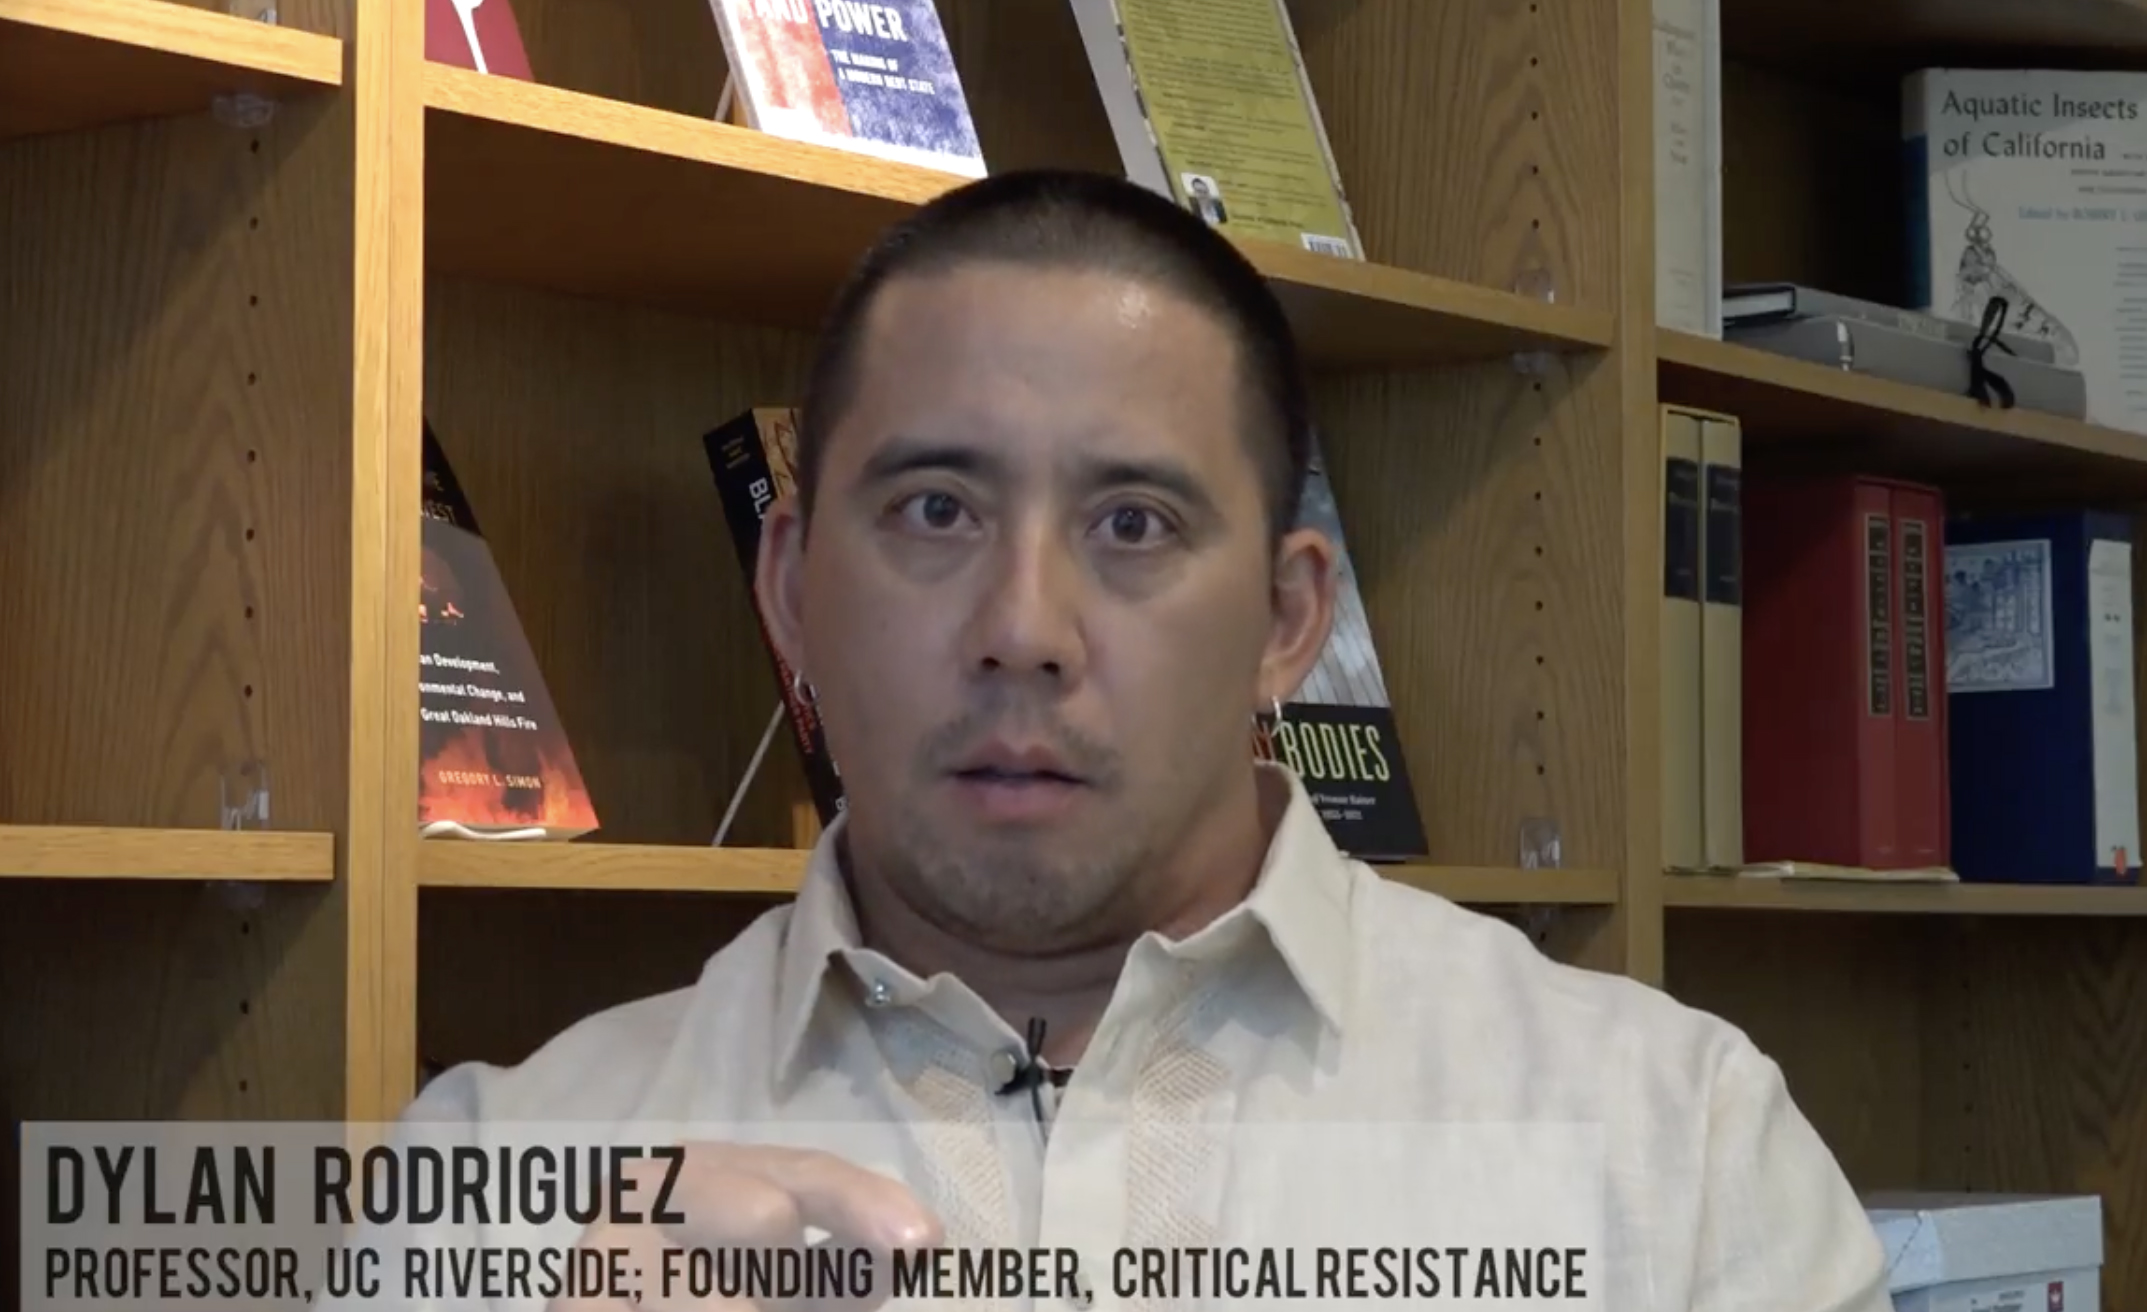 A man in a beige shirt stands in front of a wooden bookshelf filled with various books. The caption reads: &quot;Dylan Rodriguez, Professor, UC Riverside; Founding Member, Critical Resistance.&quot;